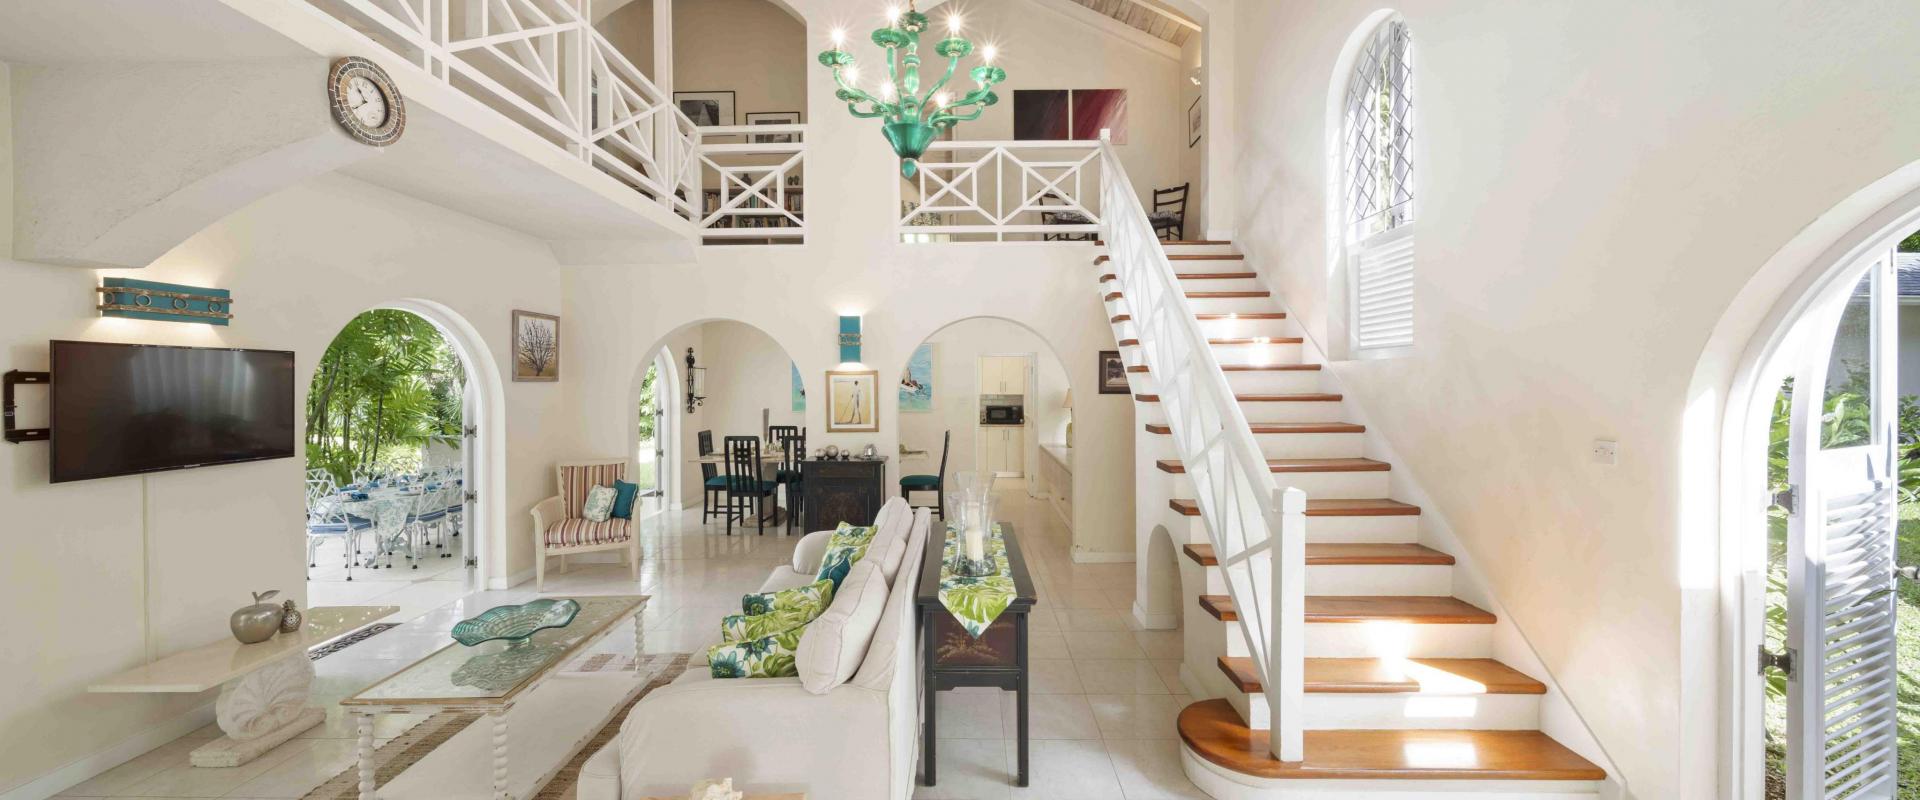 Dene Court Sandy Lane Barbados Living Room with Stairs to Bedrooms